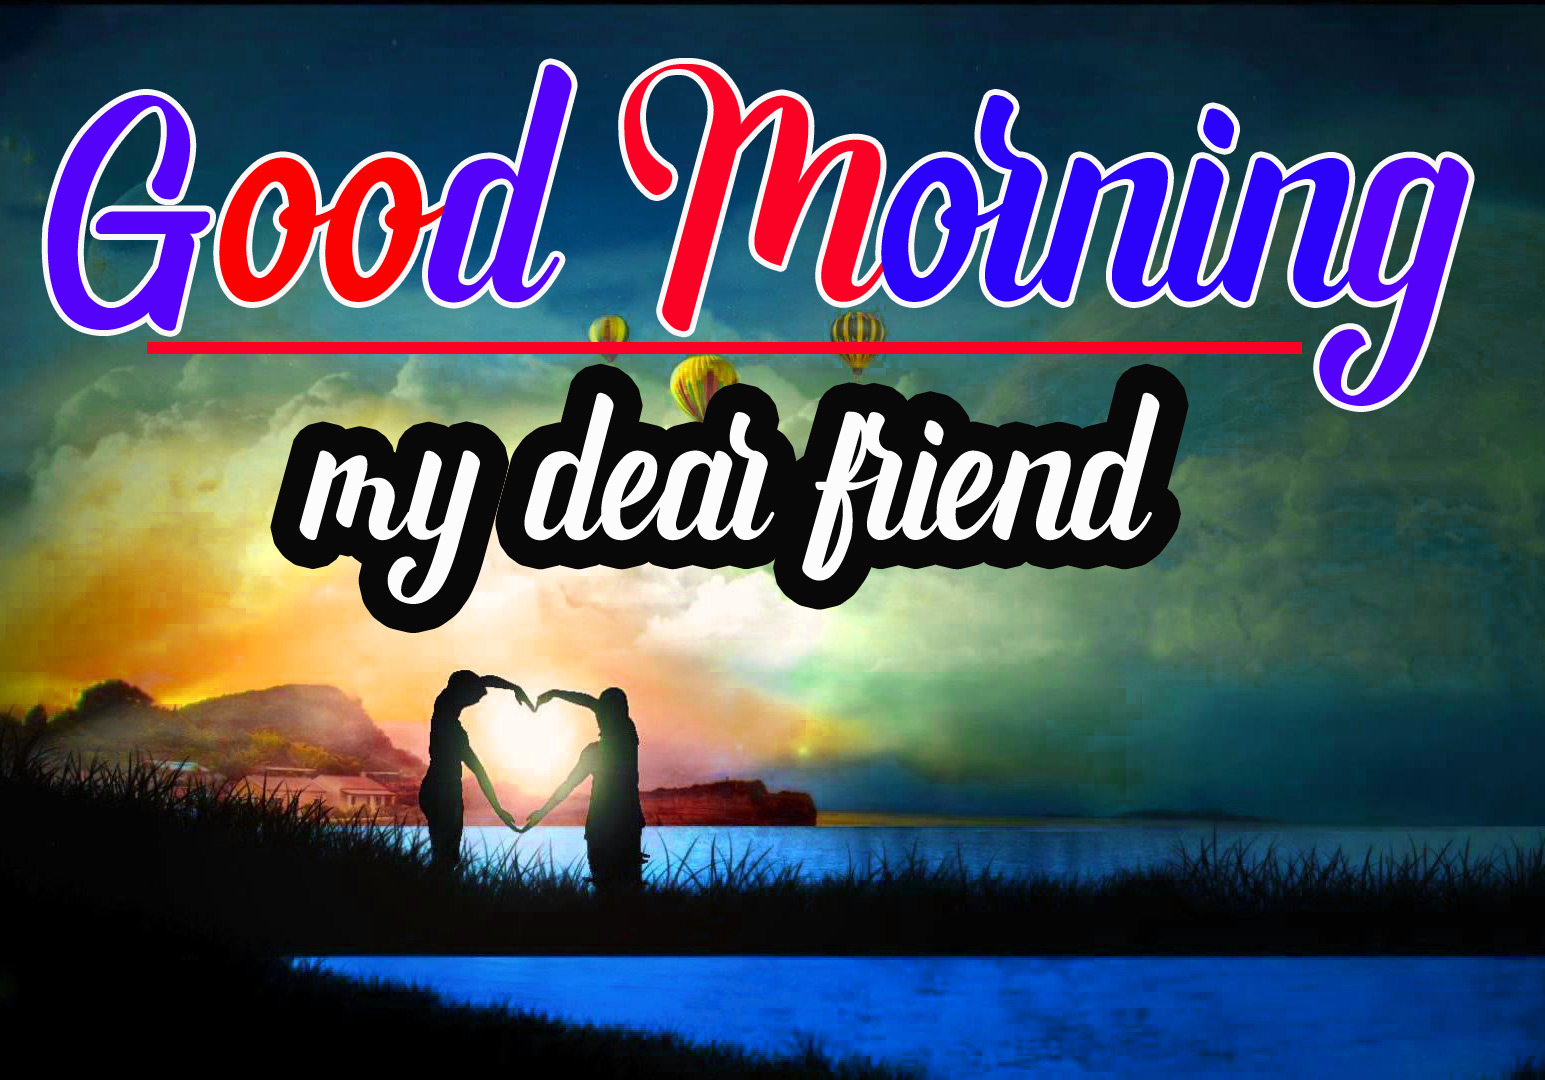 Good Morning Pictures Download 